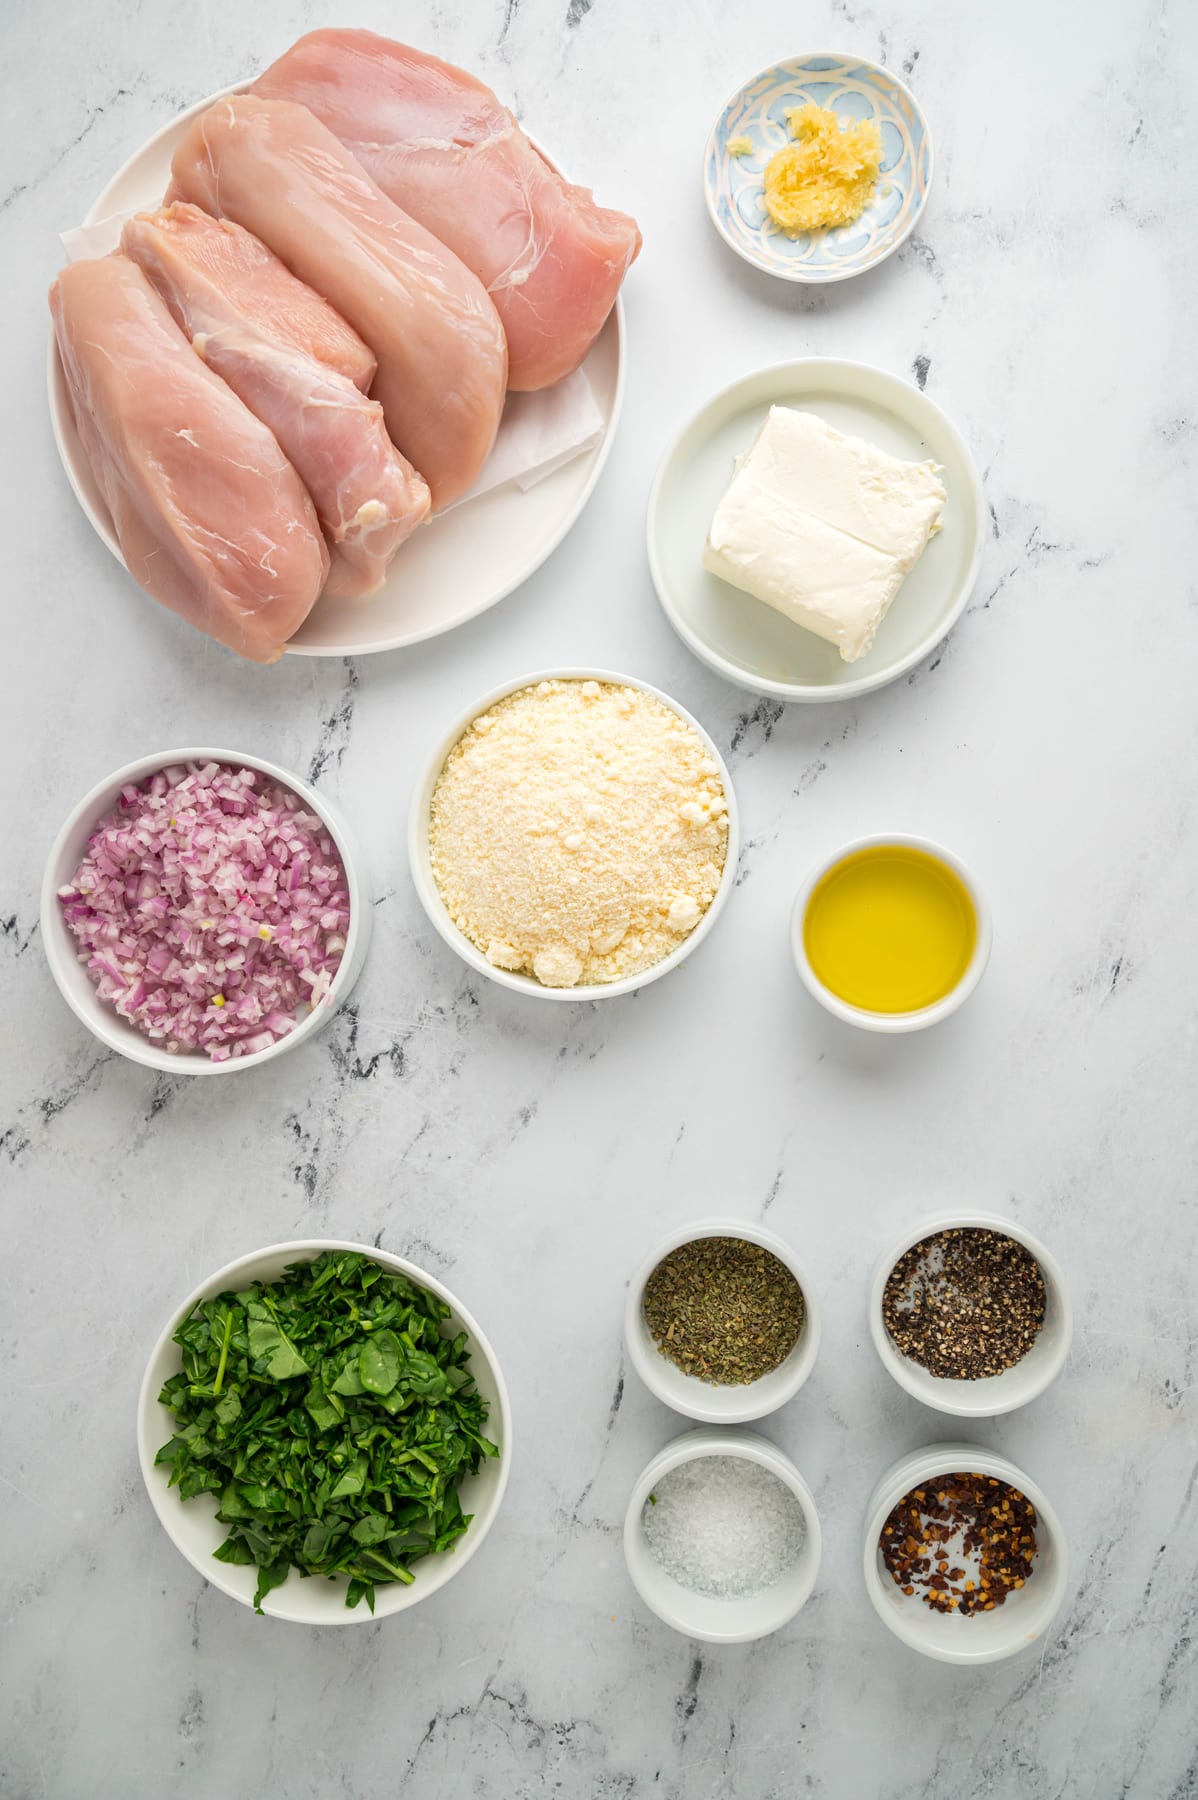 Stuffed chicken breast with spinach ingredients